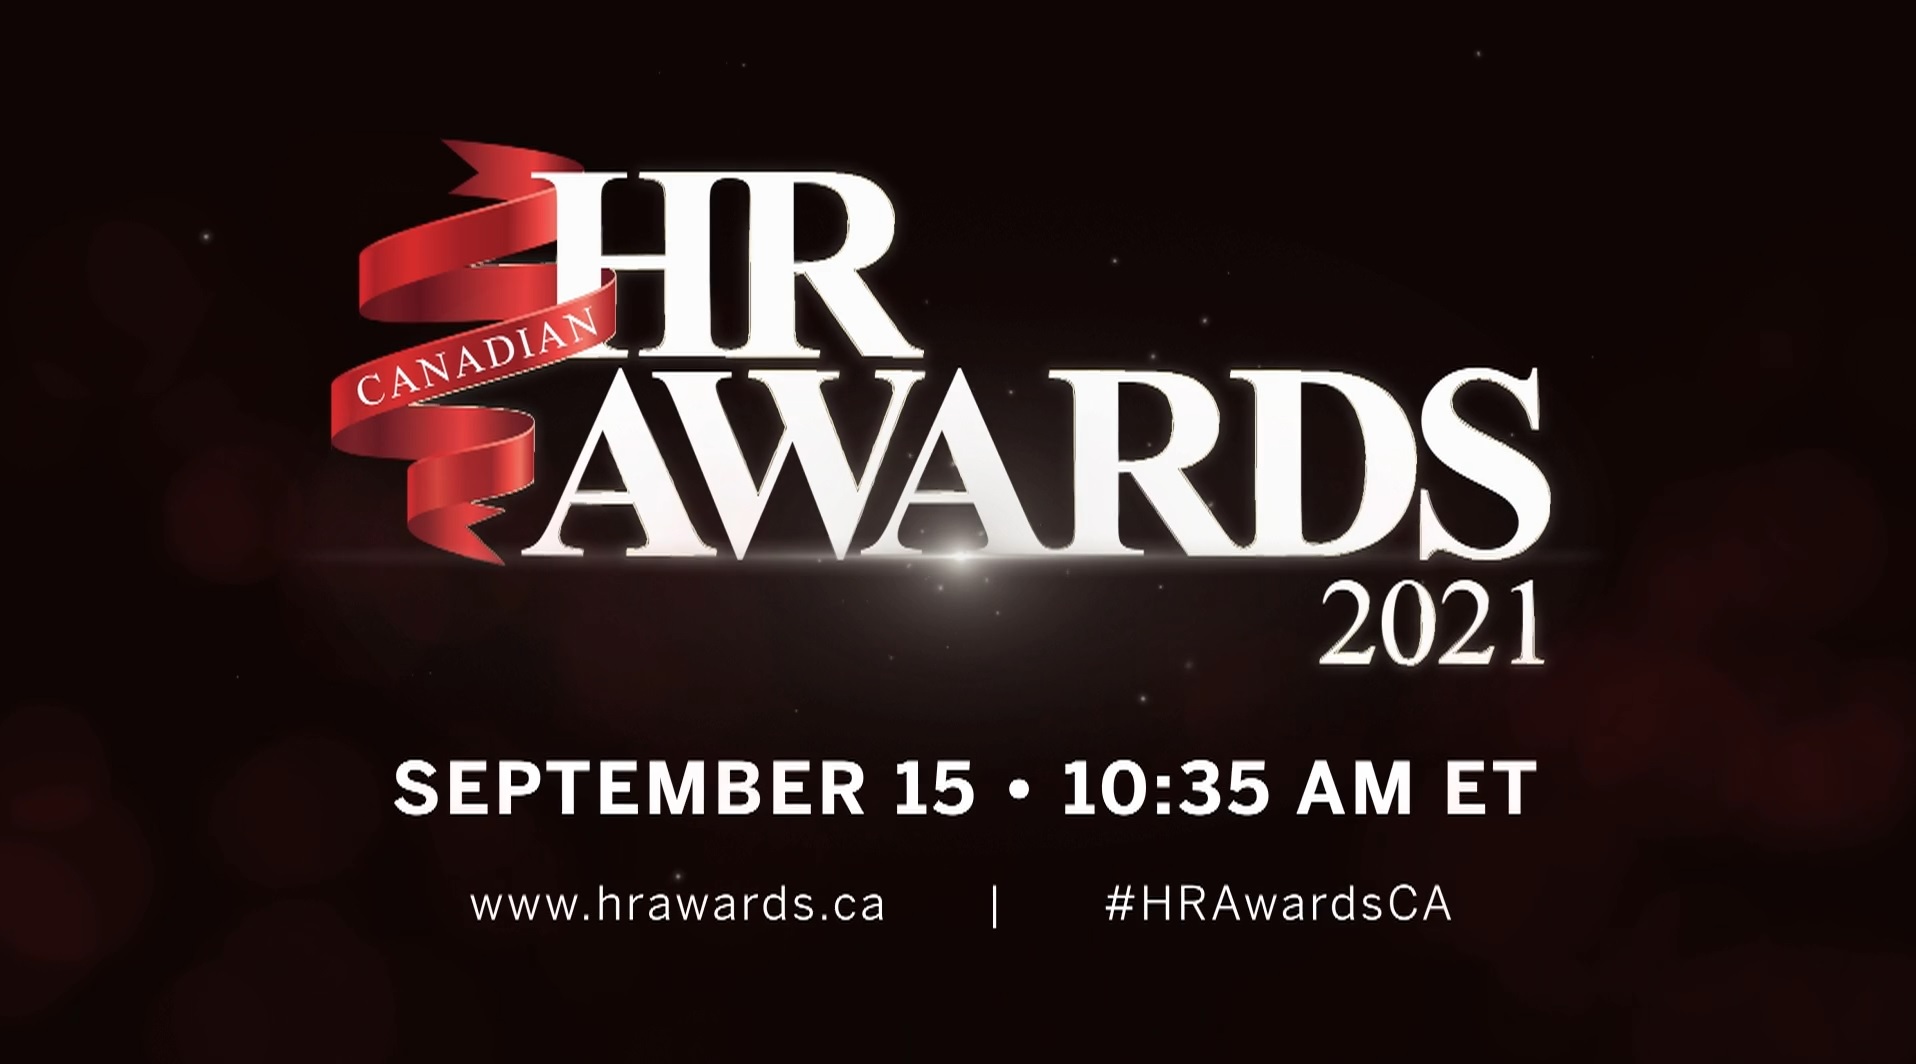 What to expect at the virtual Canadian HR Awards 2021